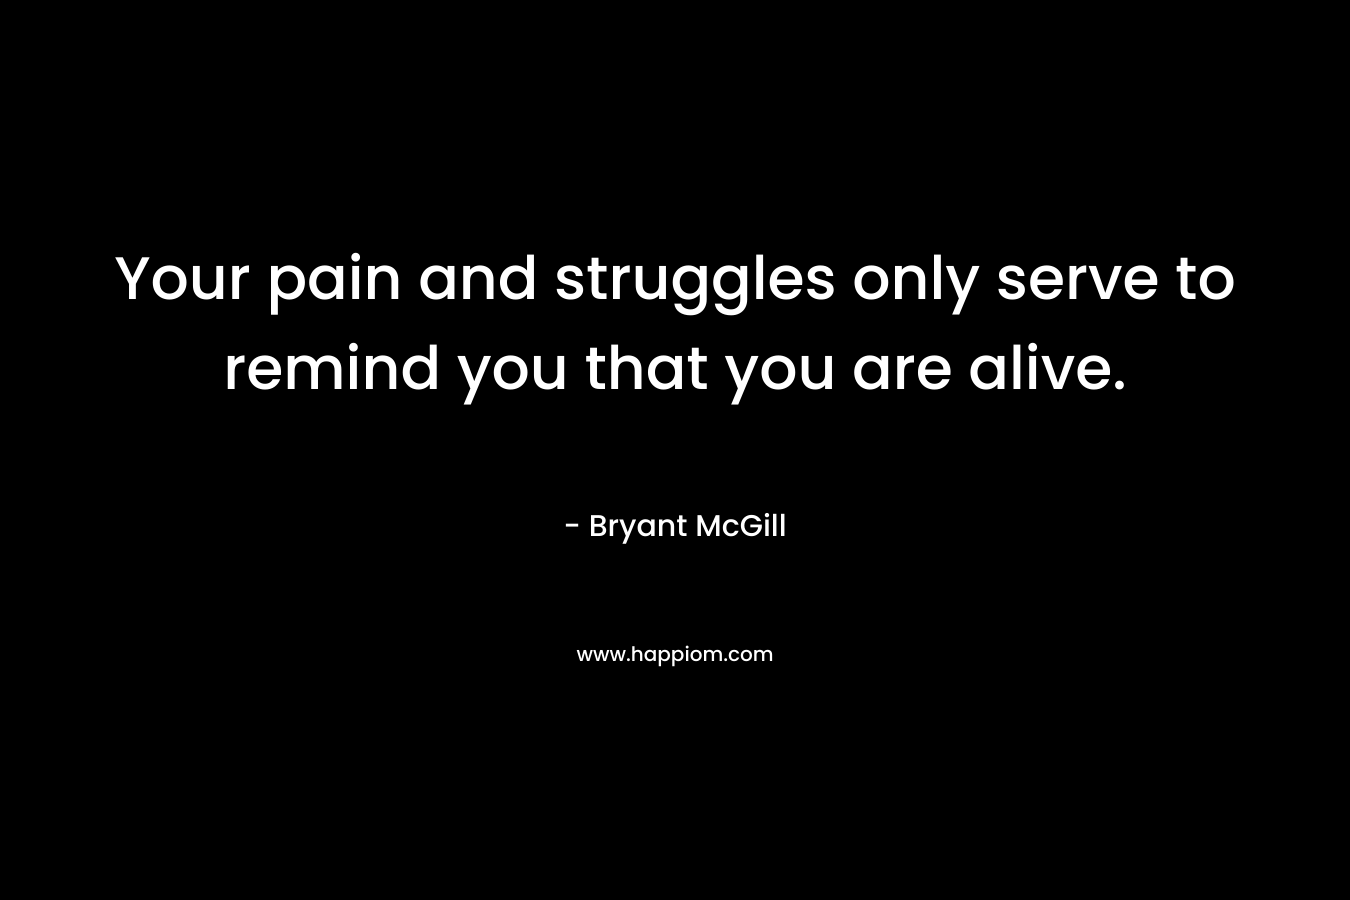 Your pain and struggles only serve to remind you that you are alive. – Bryant McGill